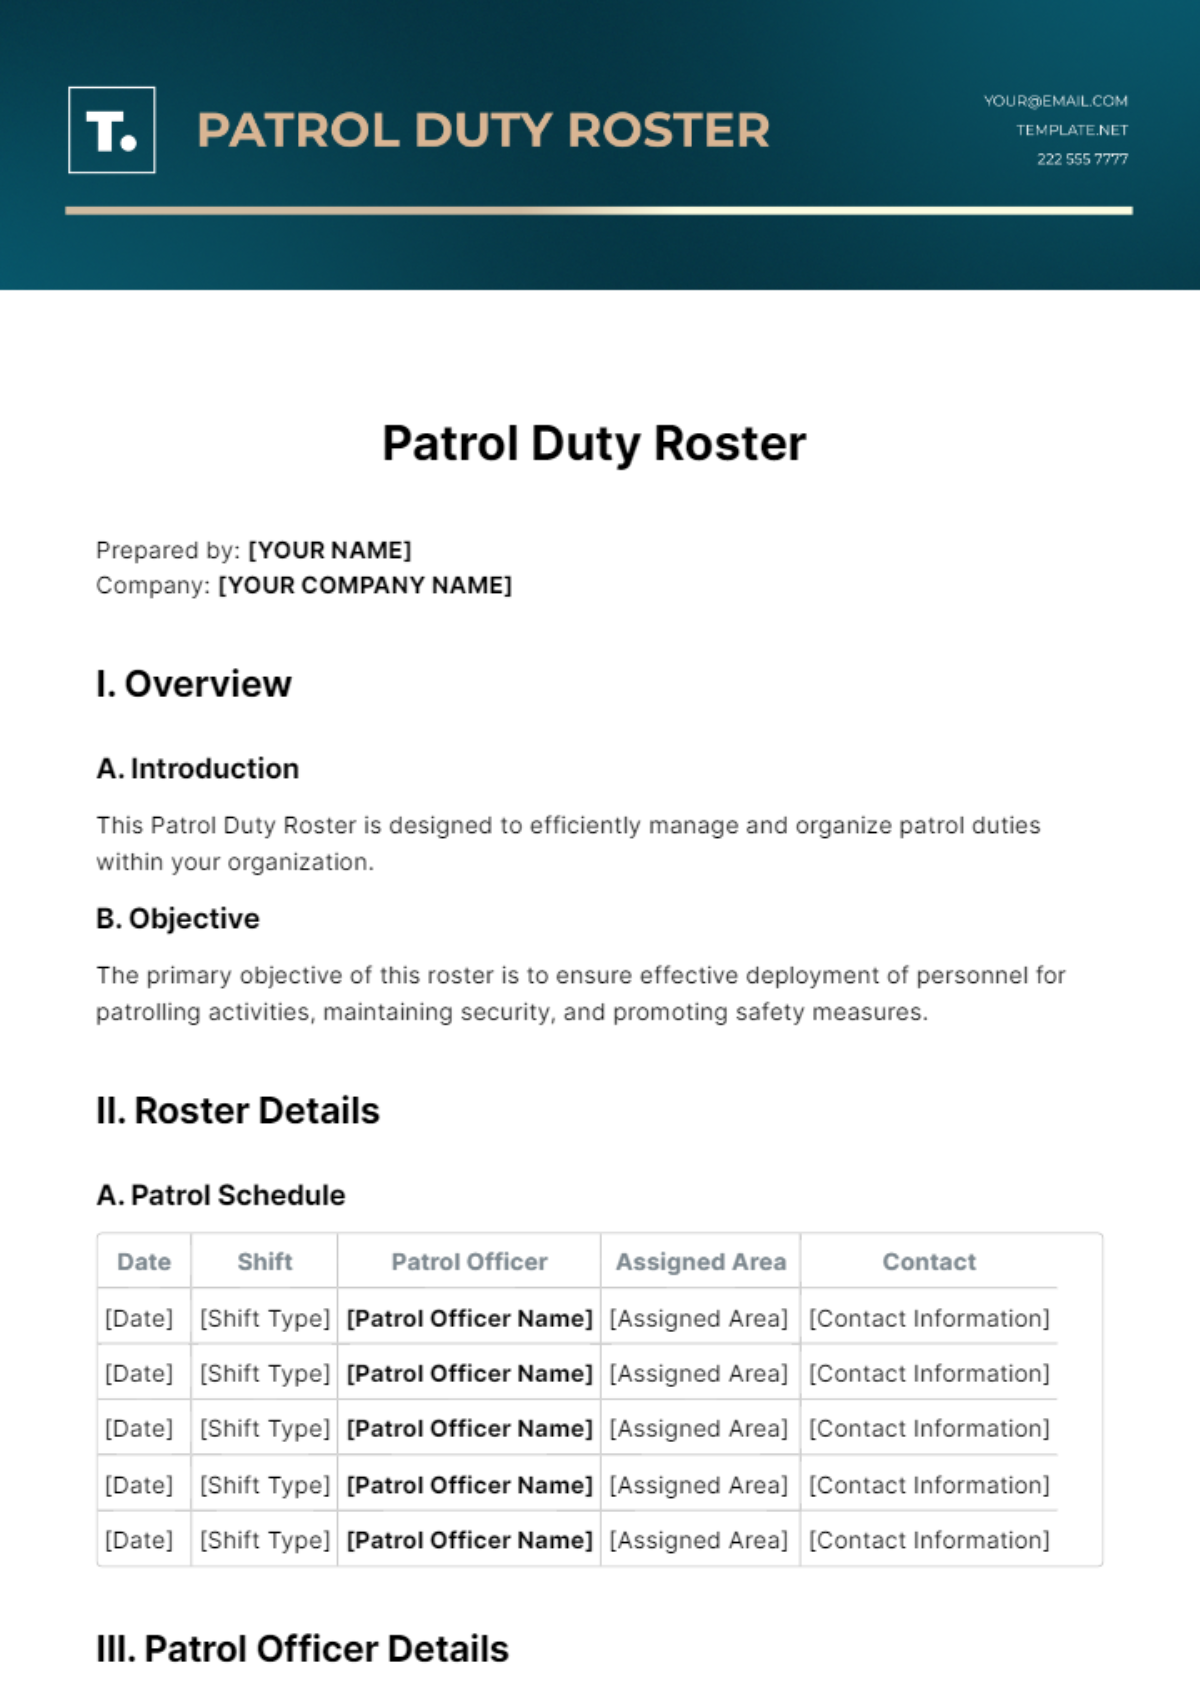 Patrol Duty Roster Template